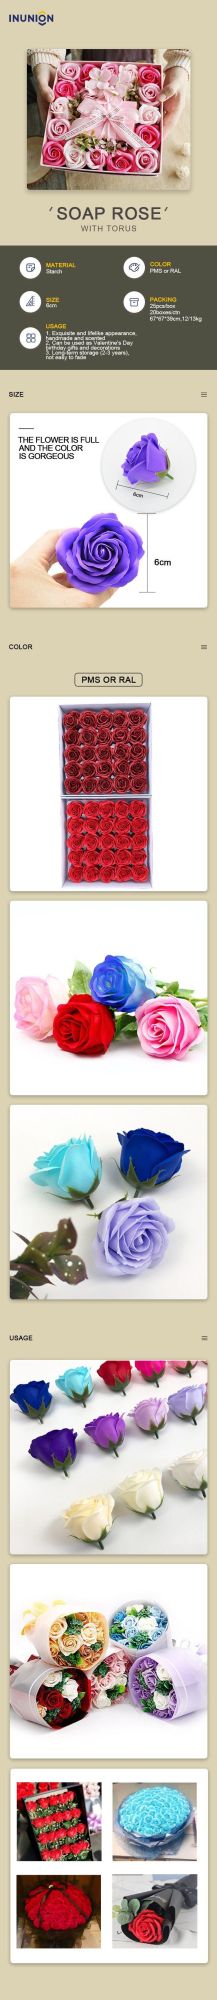 Artificial Bath Flower 25PCS Per Box Rose Soap Flowers 6cm Head Foam Soap Roses for Wedding and Valentin′s Day